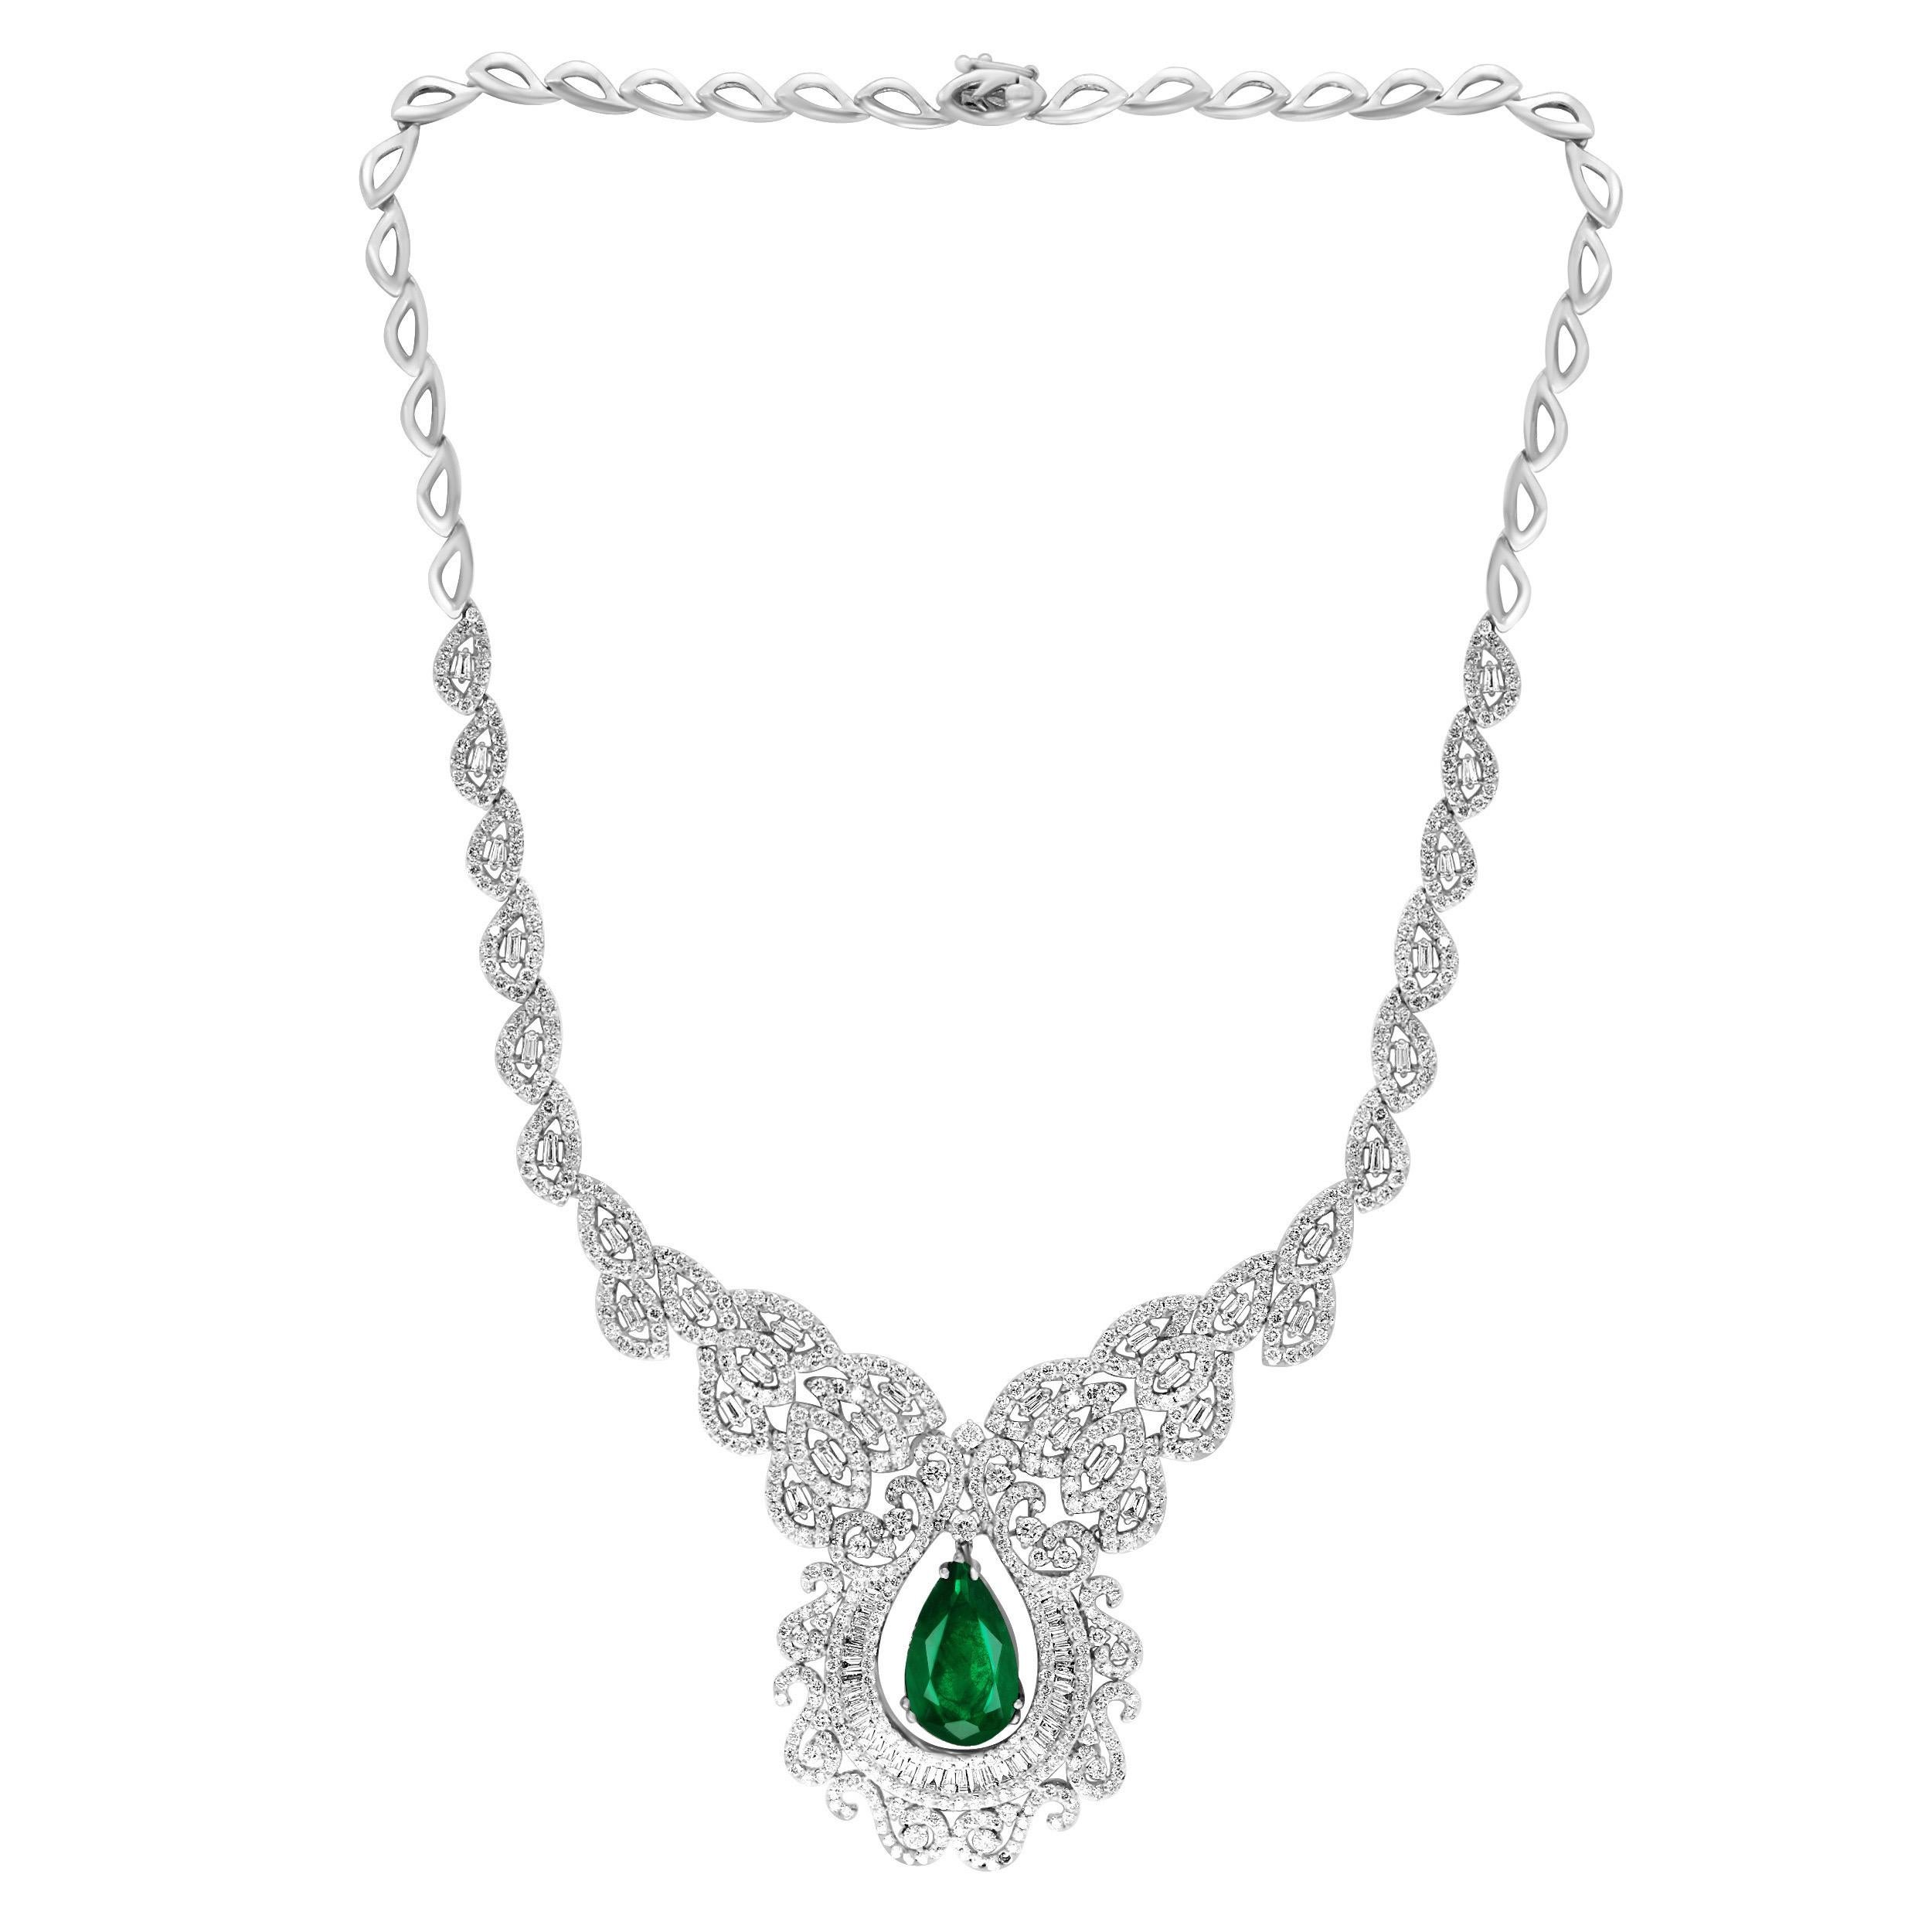 Approximately 11 Ct Pear Shape Zambian Natural Emerald & approximately  17 Ct Diamond Necklace 18 Karat  White Gold
This spectacular Bridal set  consisting of 1 large  Pear shape  Emerald approximately 11 to 12 ct in size
There are  approximately 17